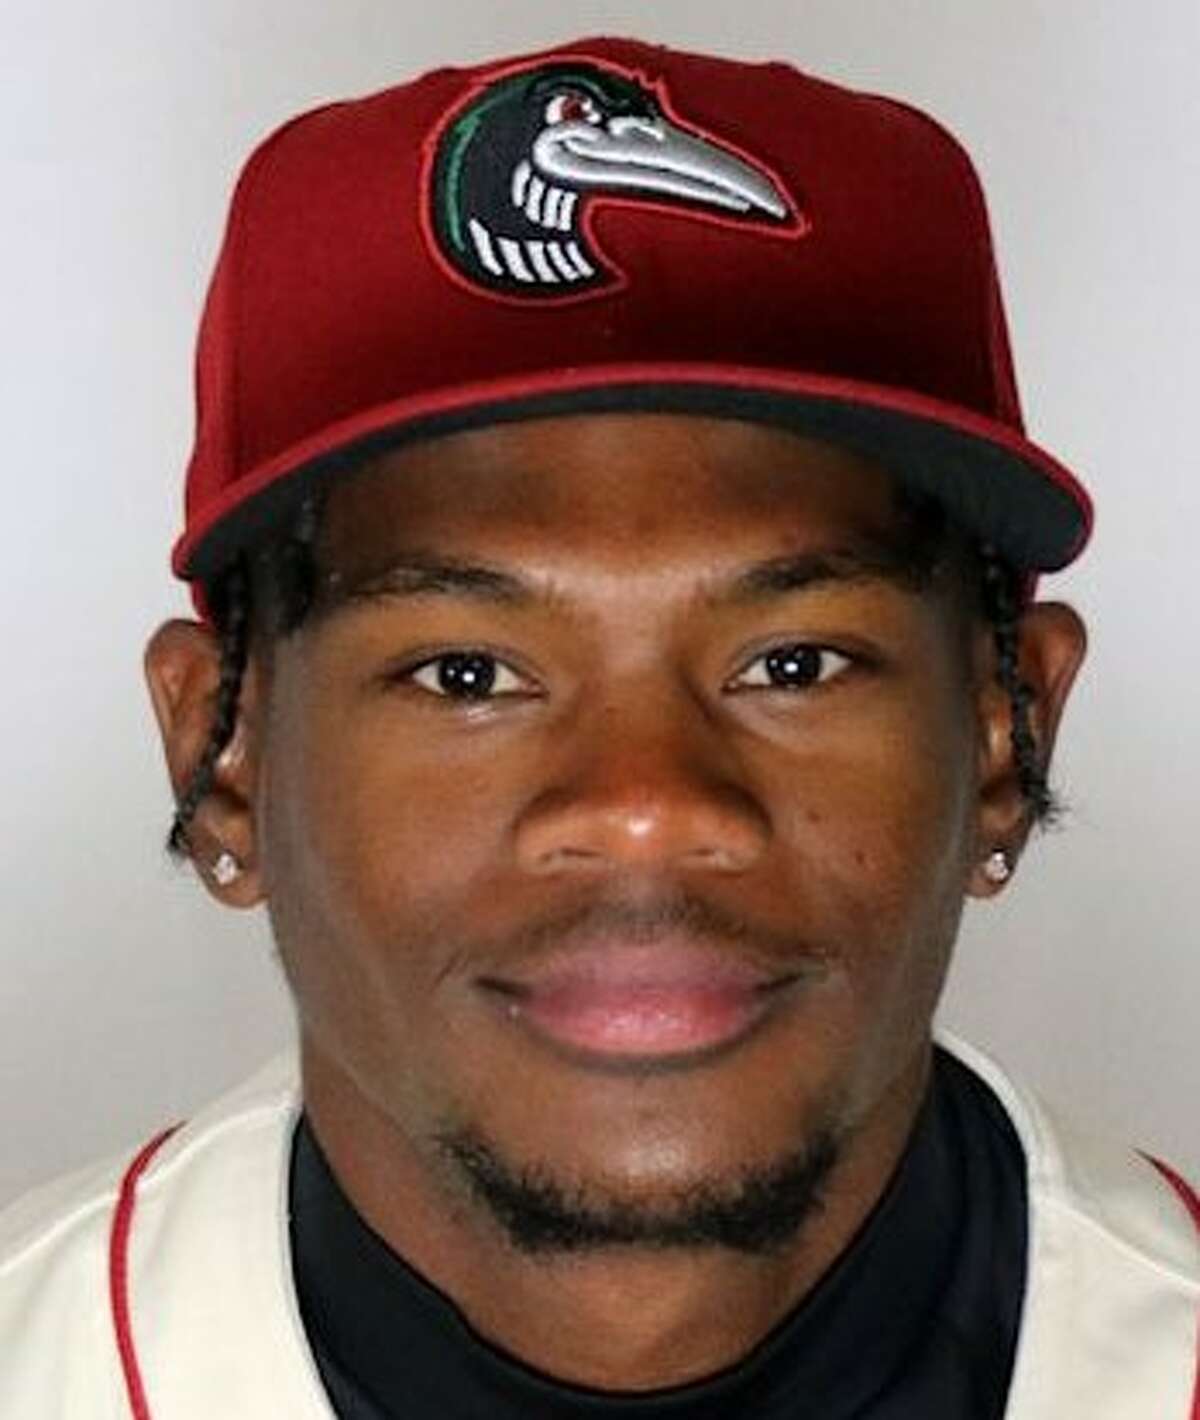 Outfielder Aldrich De Jongh hit a two-run home run, his first of the year, to key the Great Lakes Loons' 3-1 victory over the Lake County Captains Tuesday night at Dow Diamond.